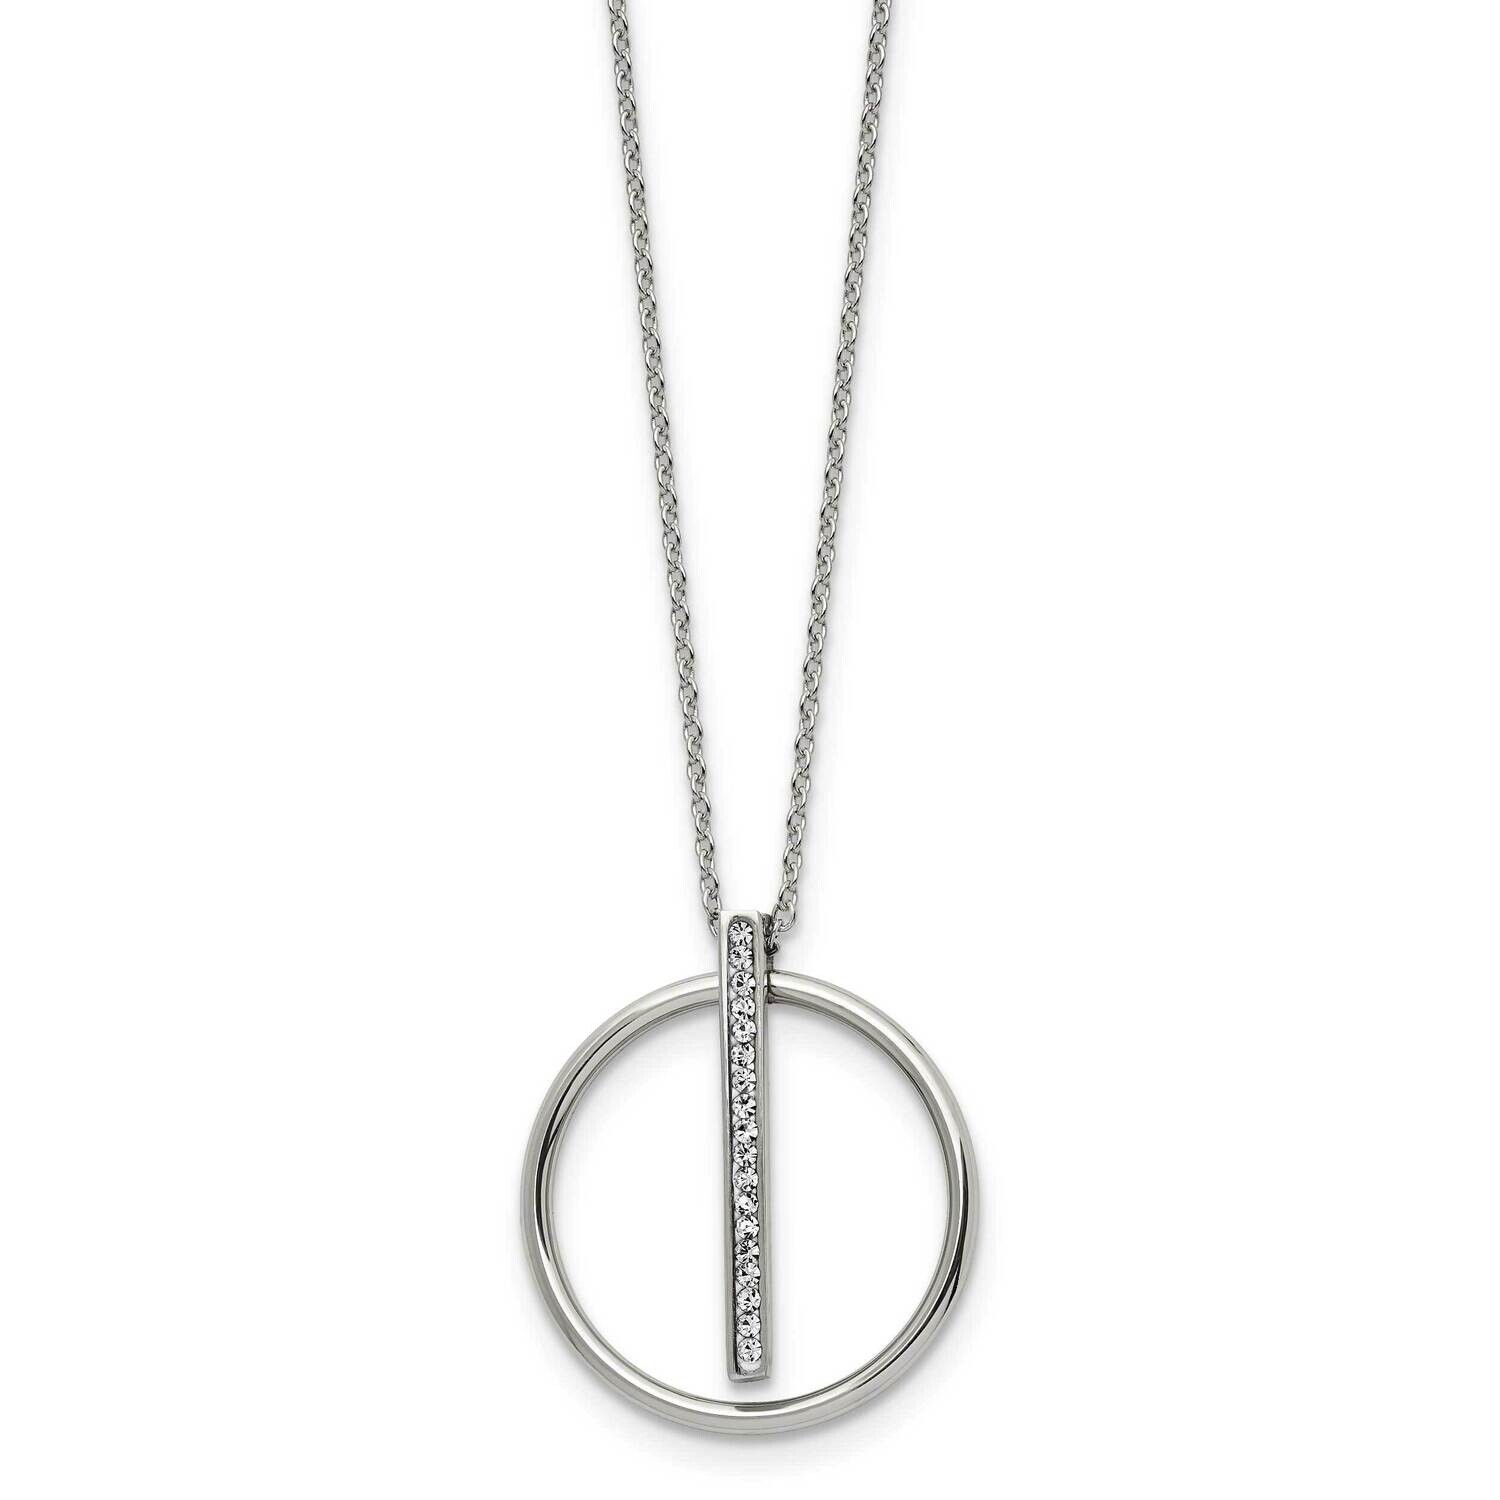 Chisel Polished Preciosa Crystal Pendant On A 16 Inch Cable Chain A 2 Inch Extension Necklace Stainless Steel SRN3081-16